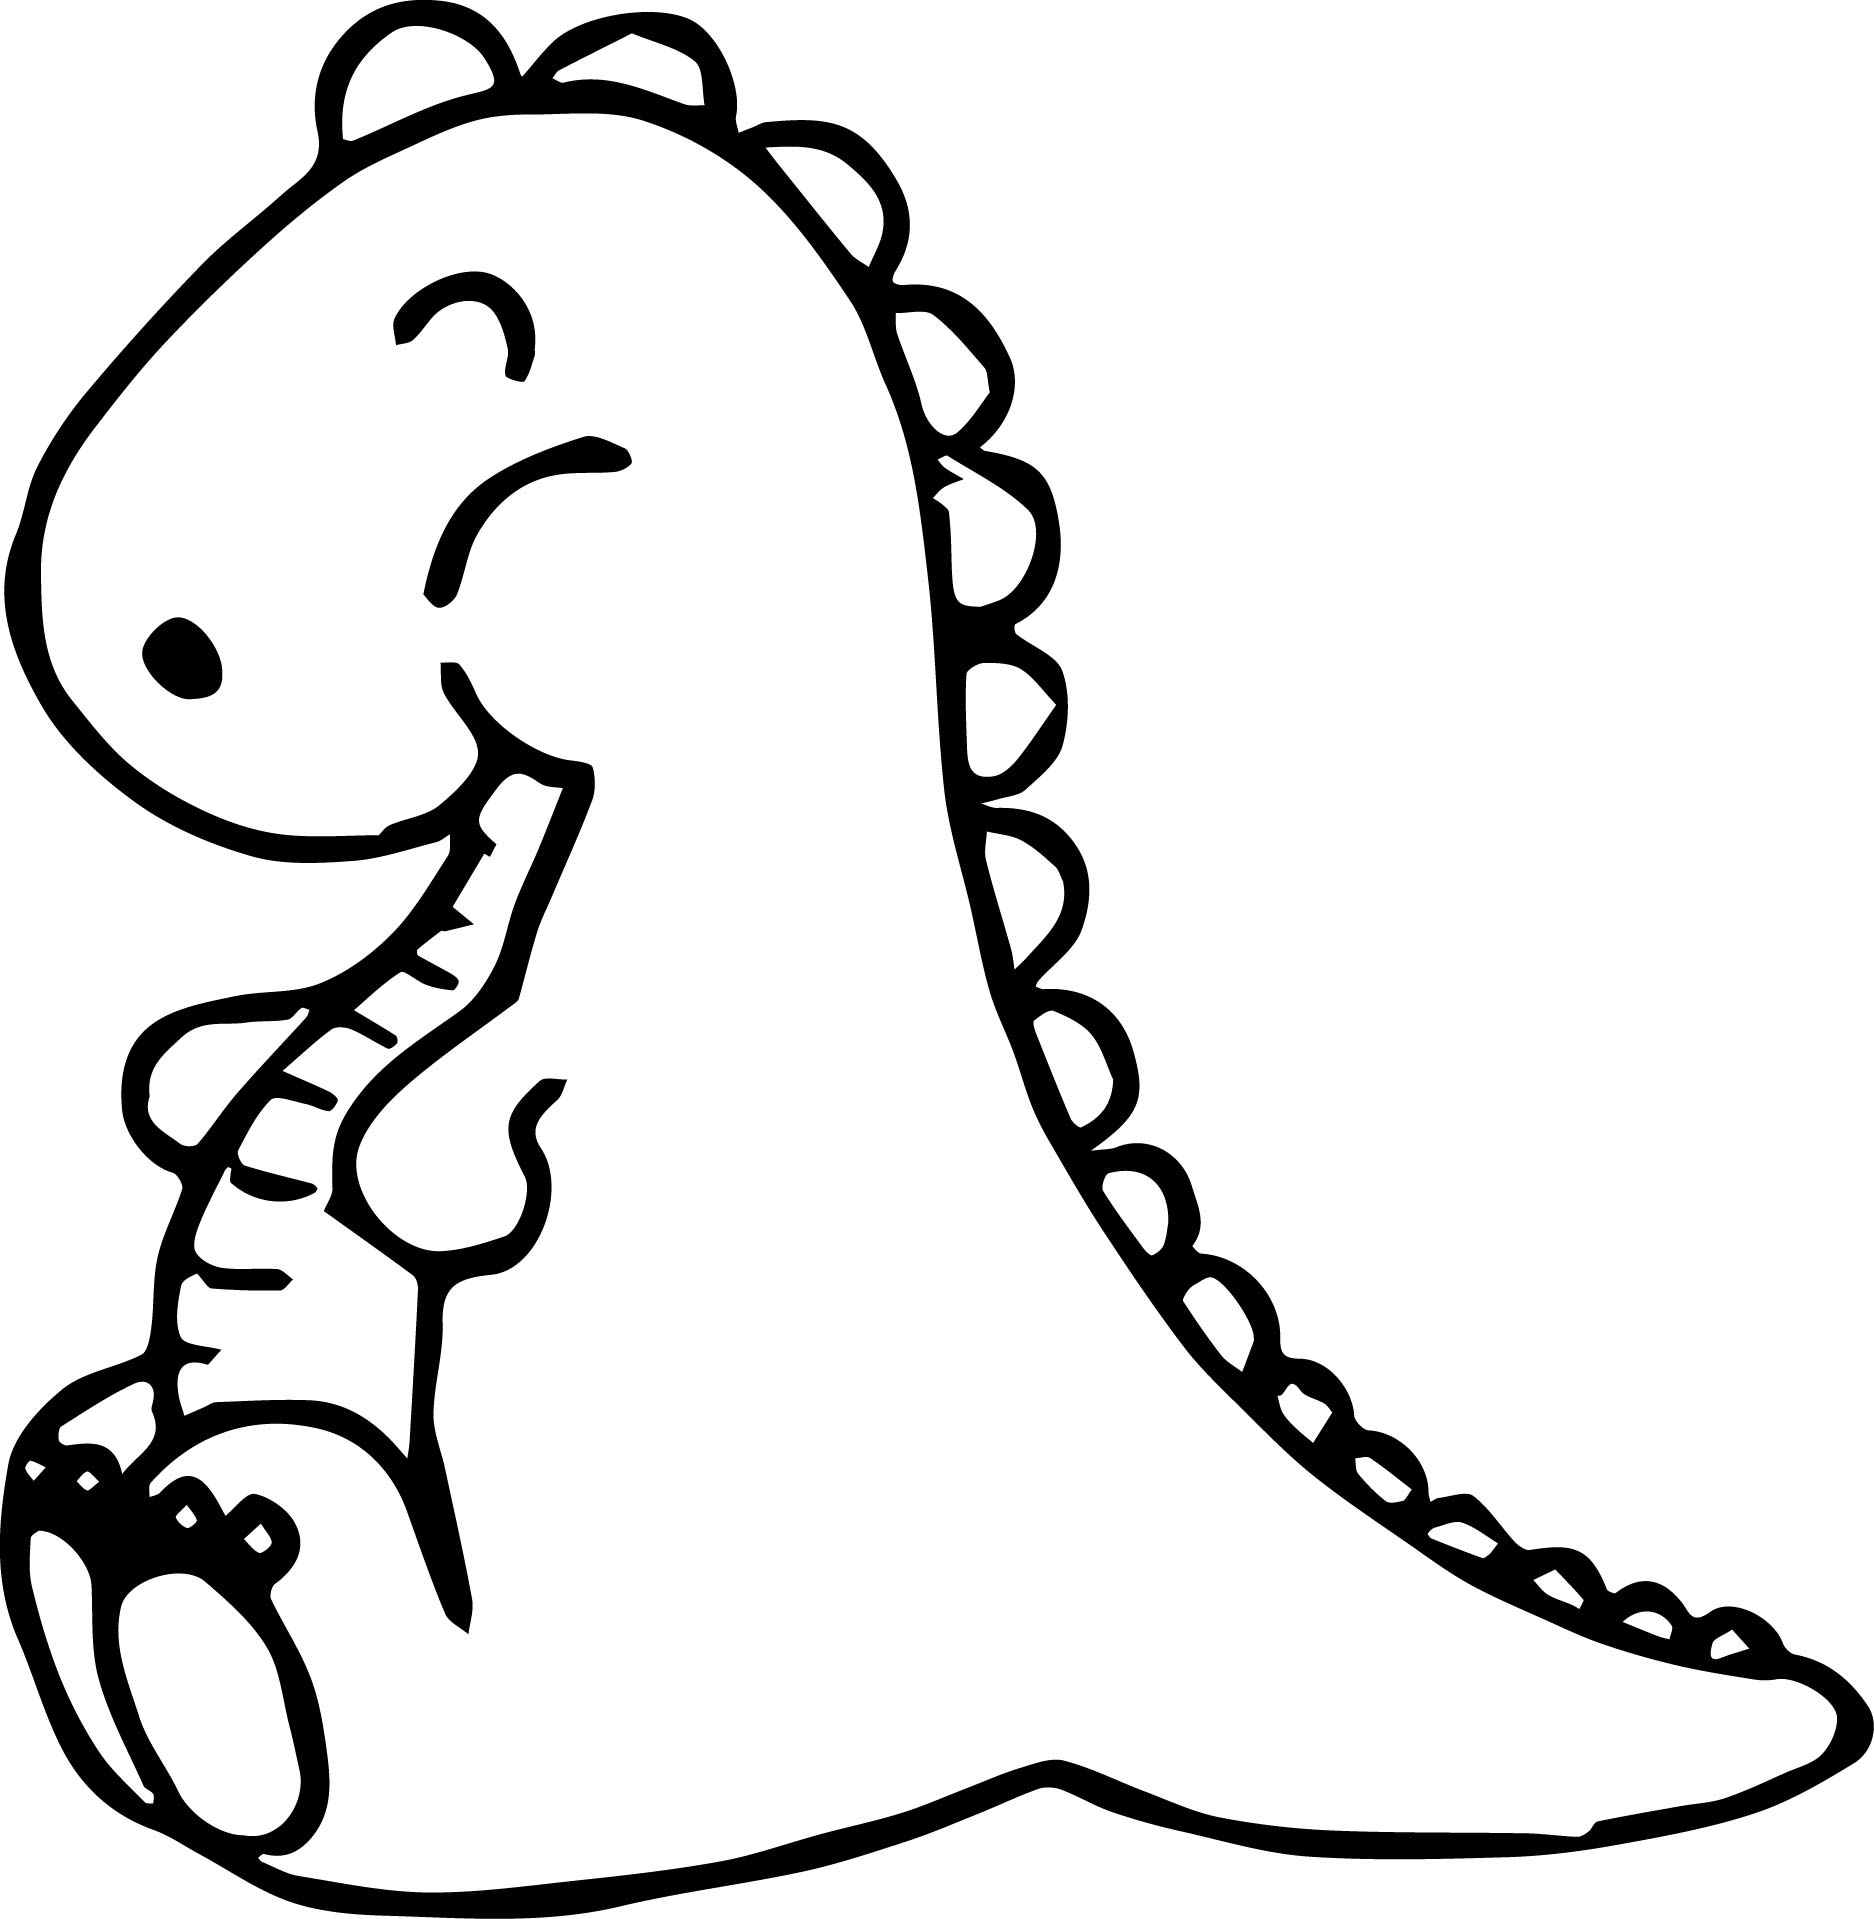 Cute Baby Dinosaur Coloring Pages At GetColorings Free Printable Colorings Pages To Print